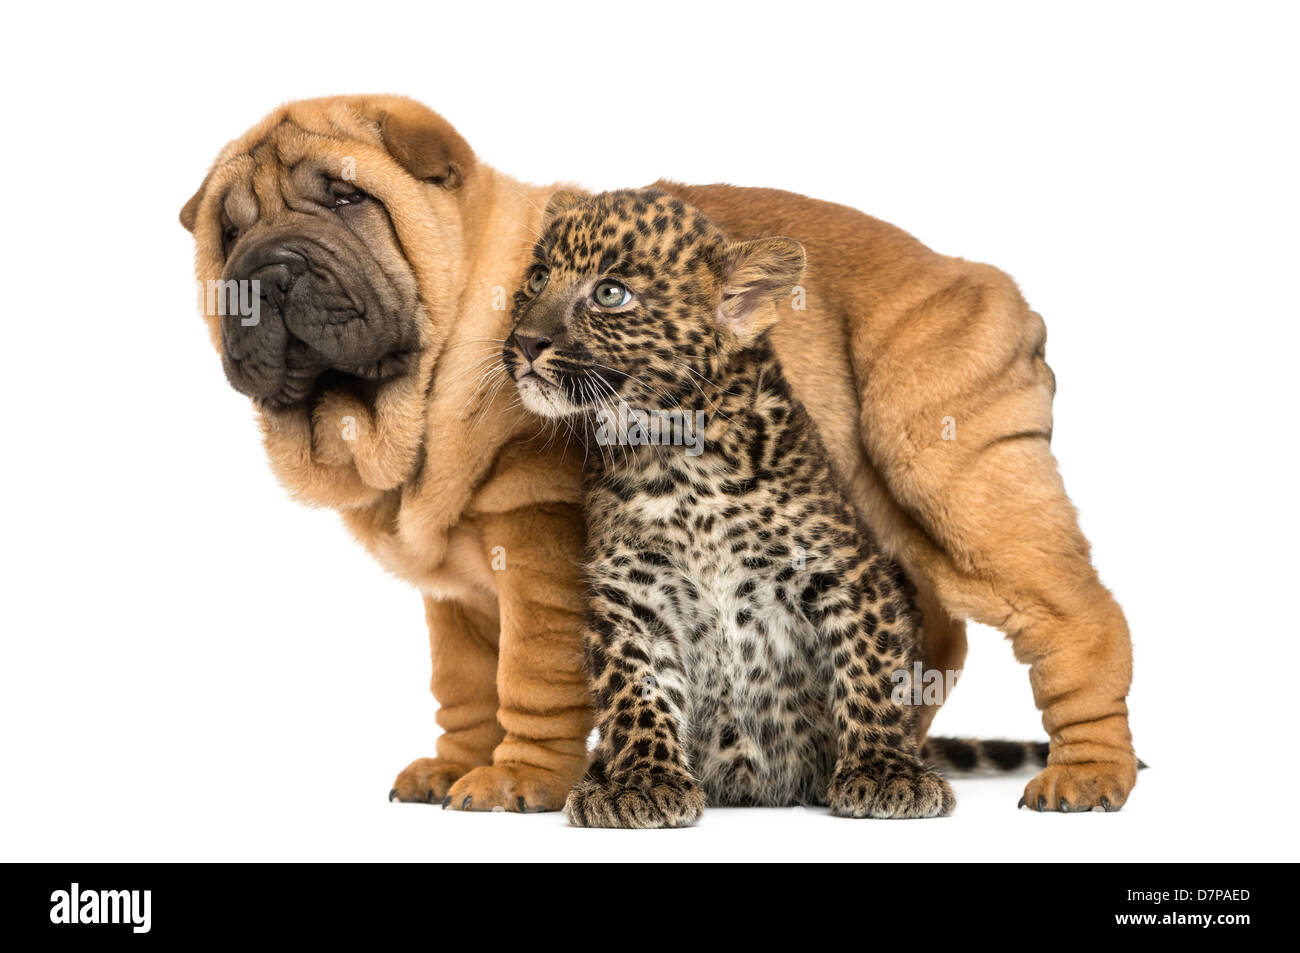 Shar pei puppy standing over a Spotted Leopard cub, Panthera pardus, against white background Stock Photo